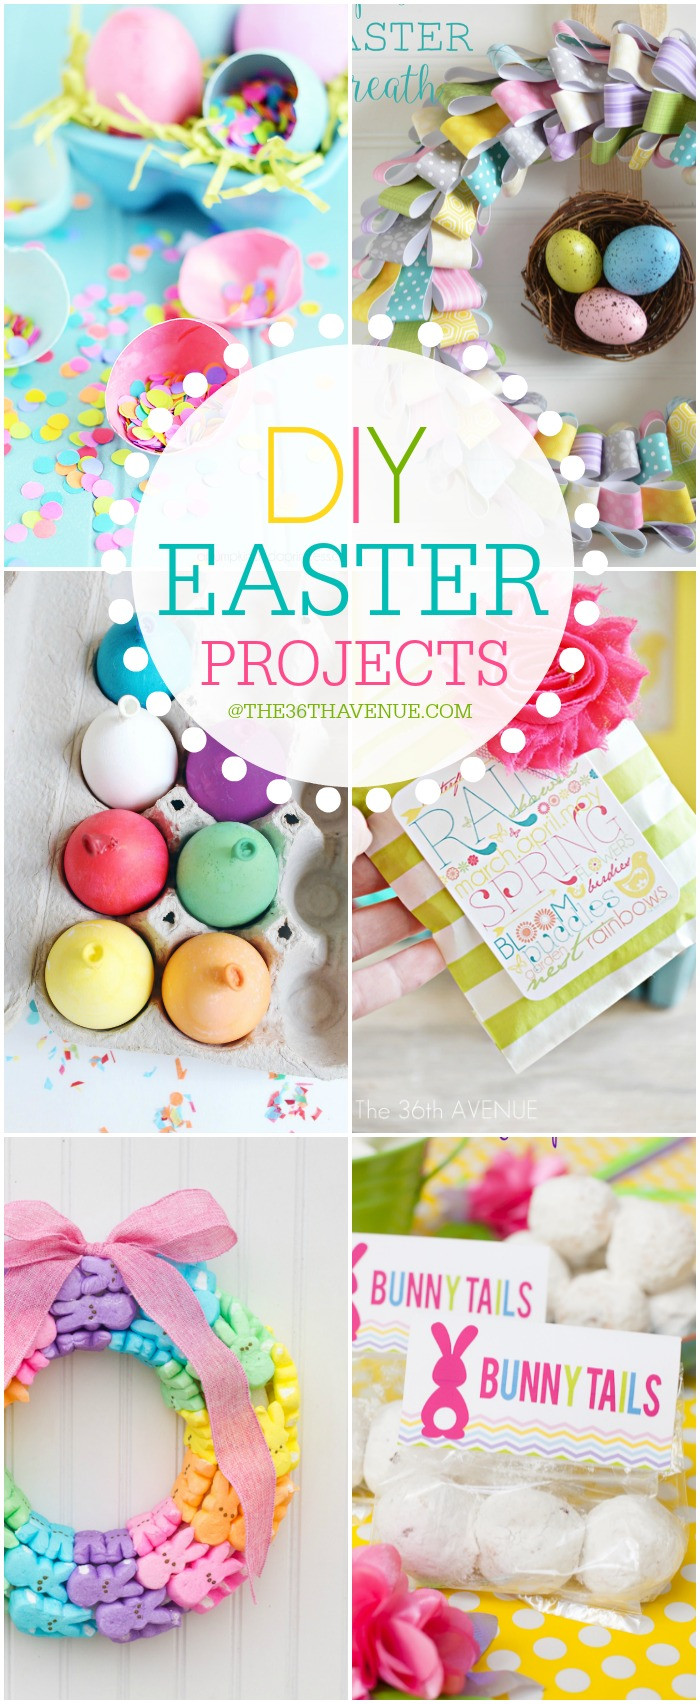 Easter Diy Crafts
 The 36th AVENUE Easter Crafts and DIY Decor Ideas